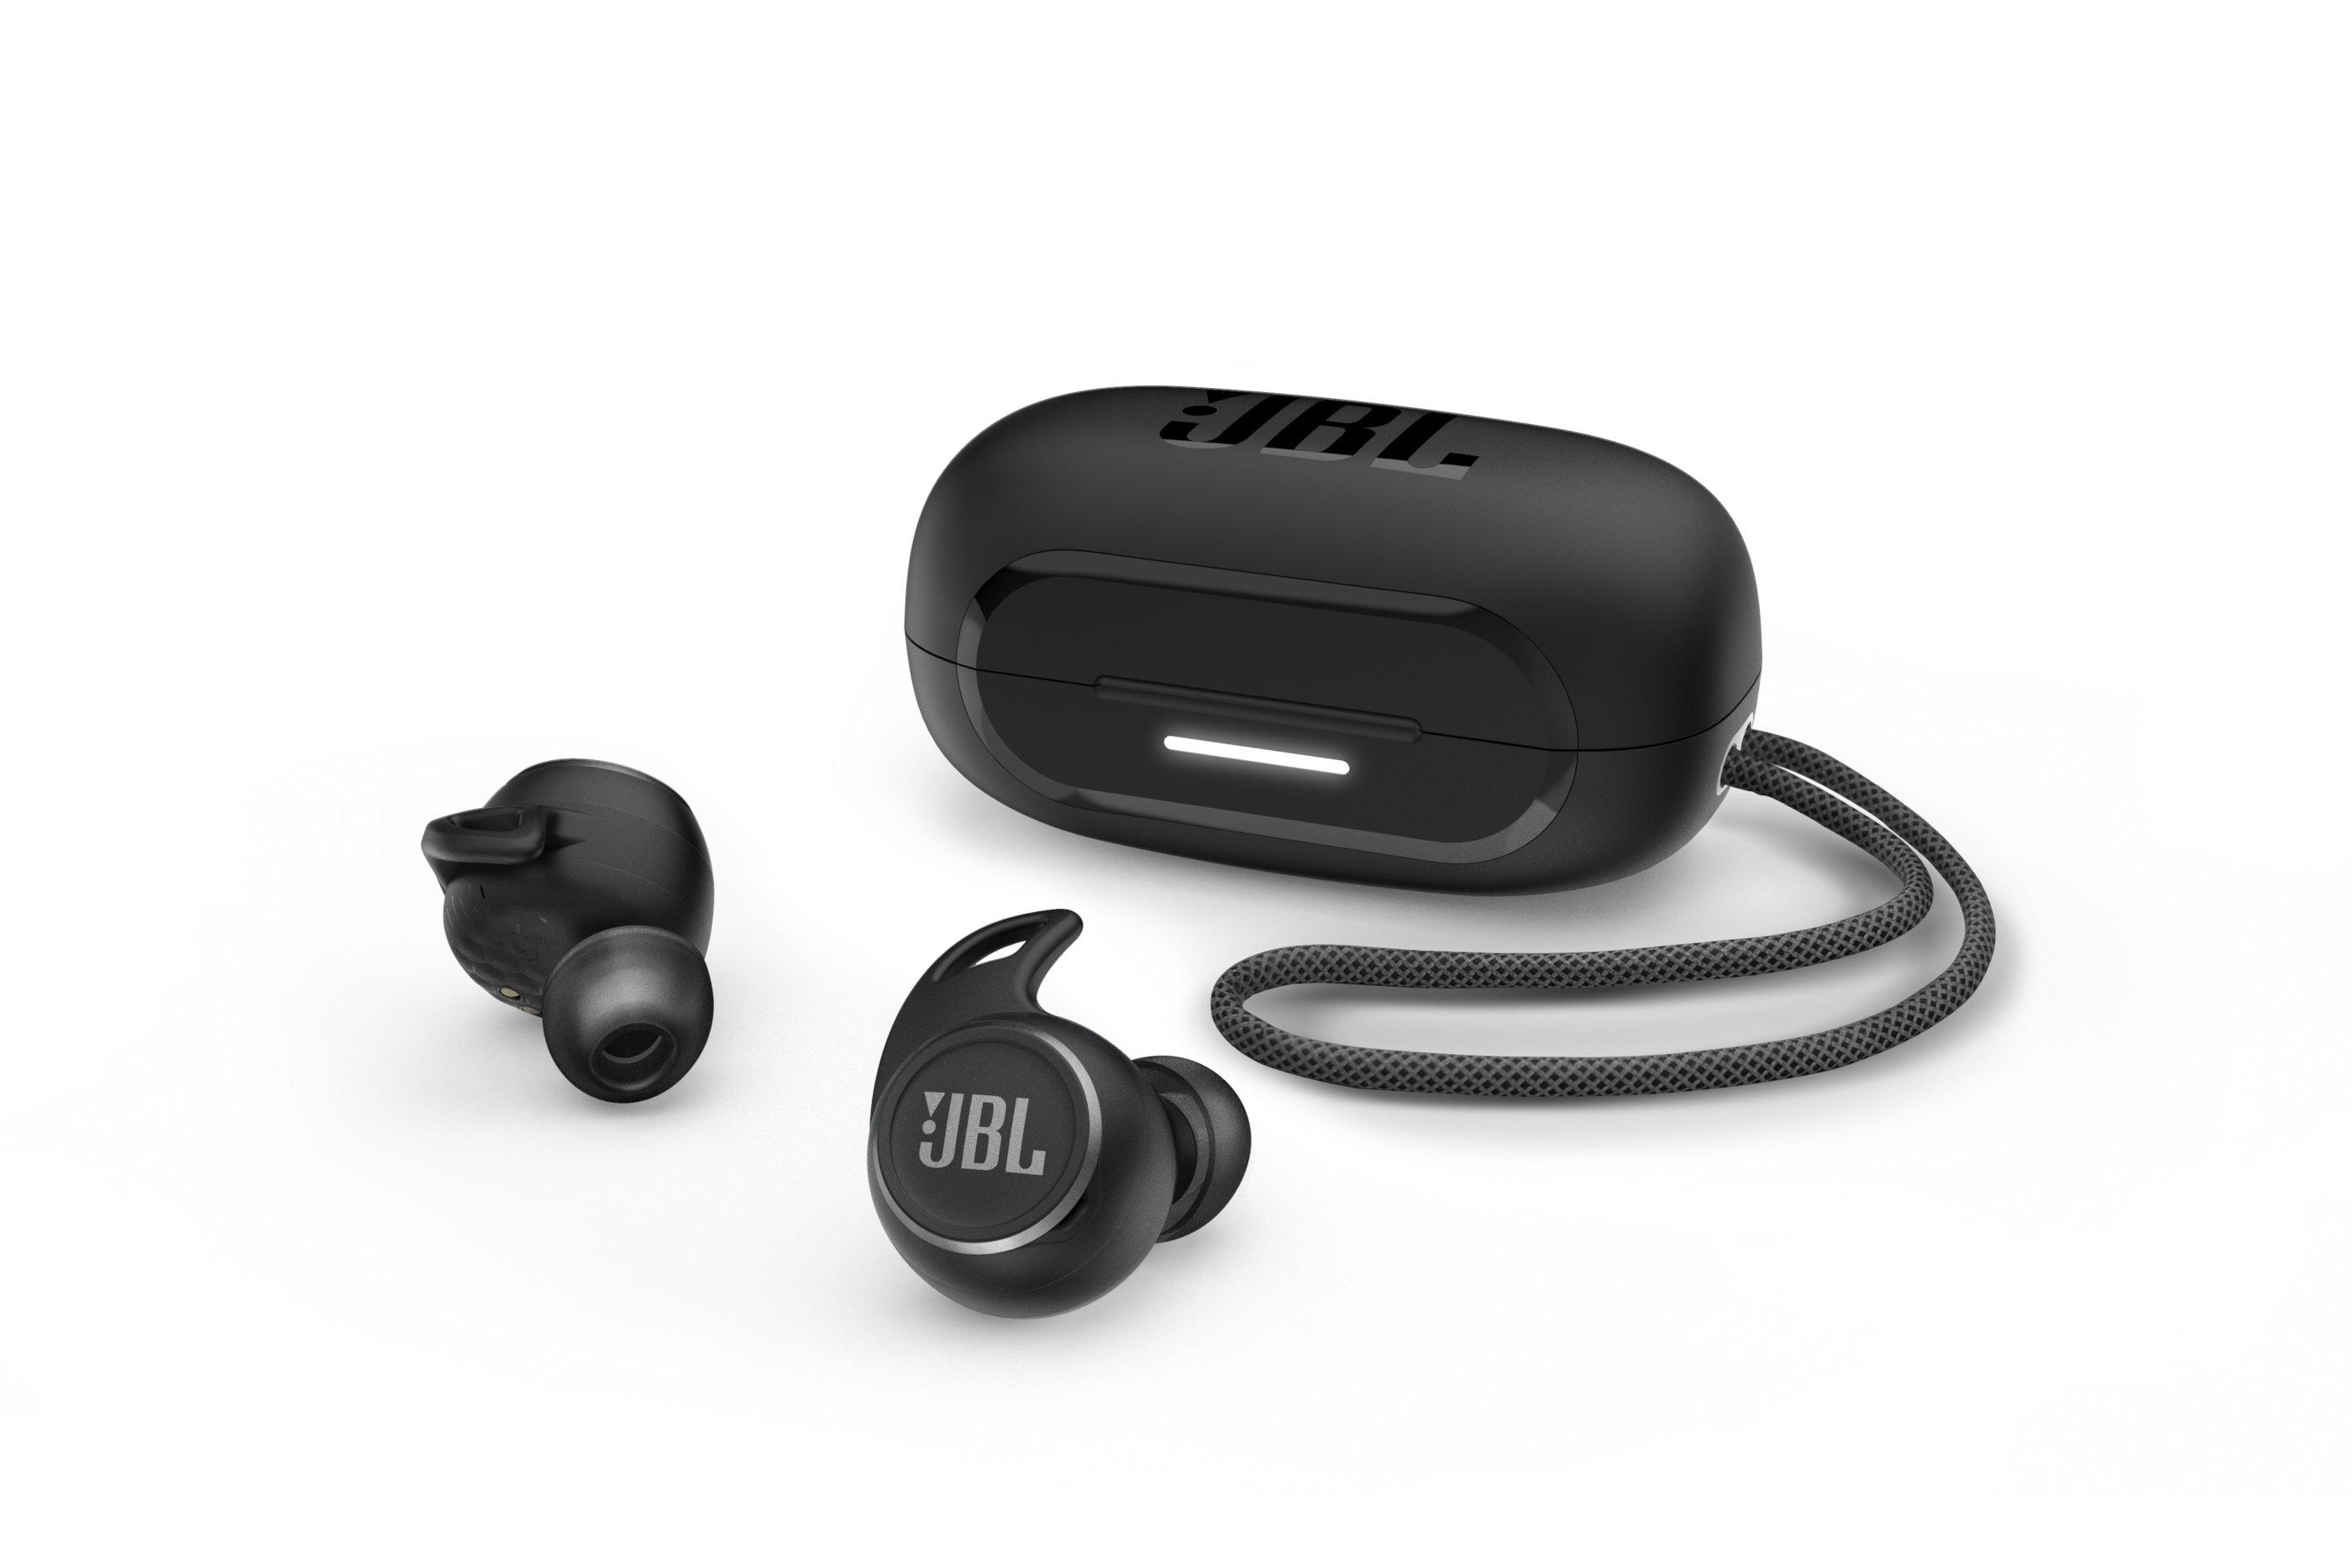 JBL announced the LIVE Pro 2, LIVE Free 2, and Reflect Aero earbuds with ANC